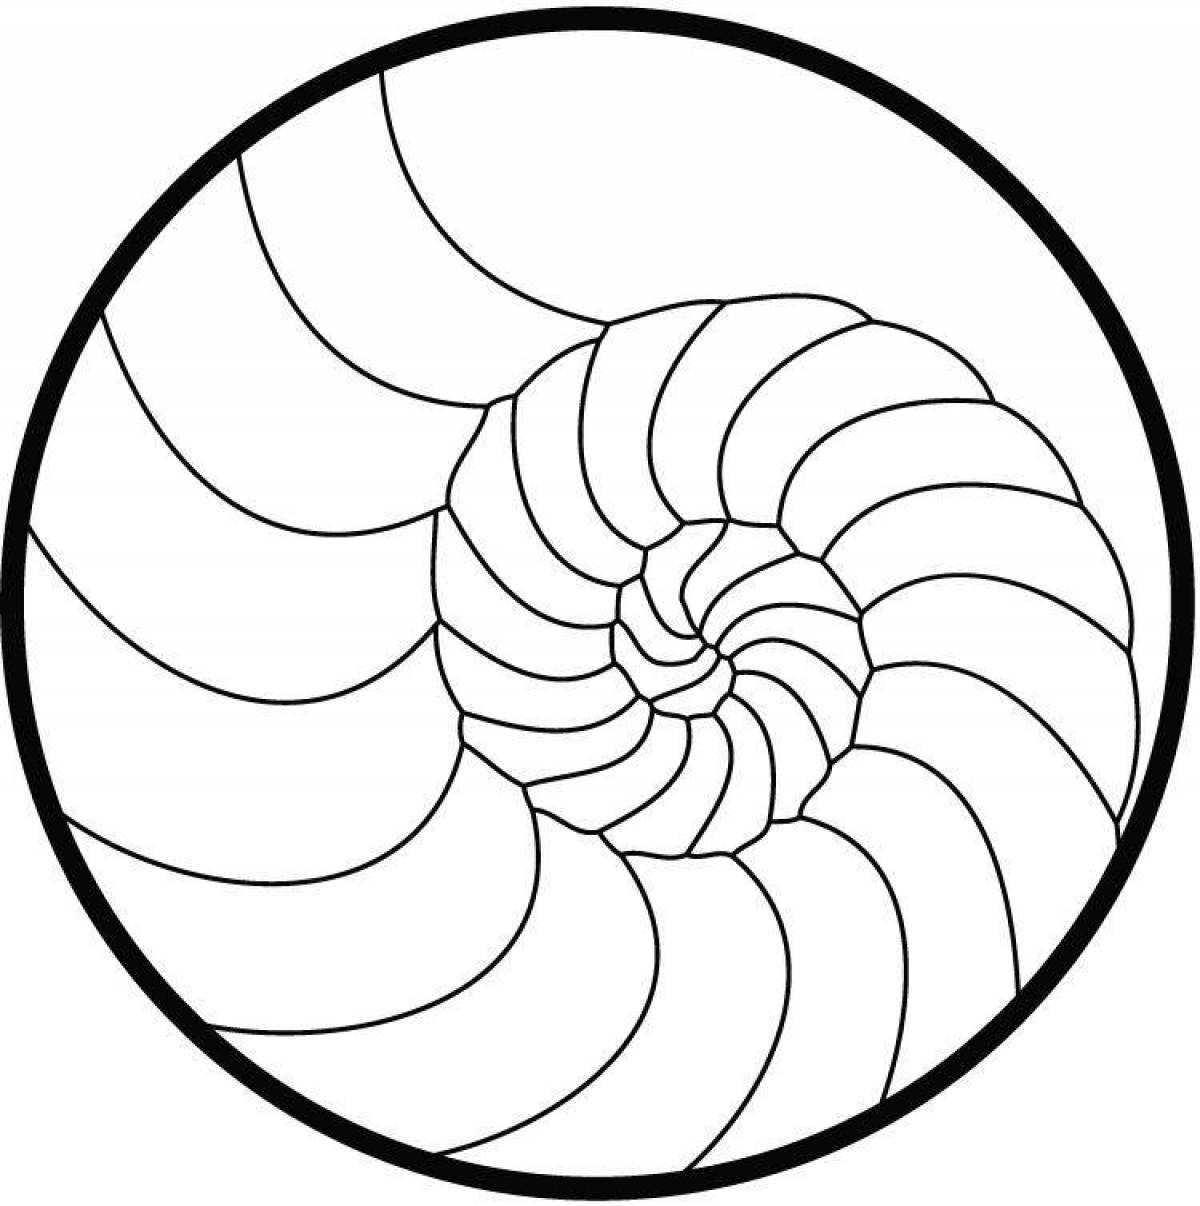 Exquisite spiral coloring